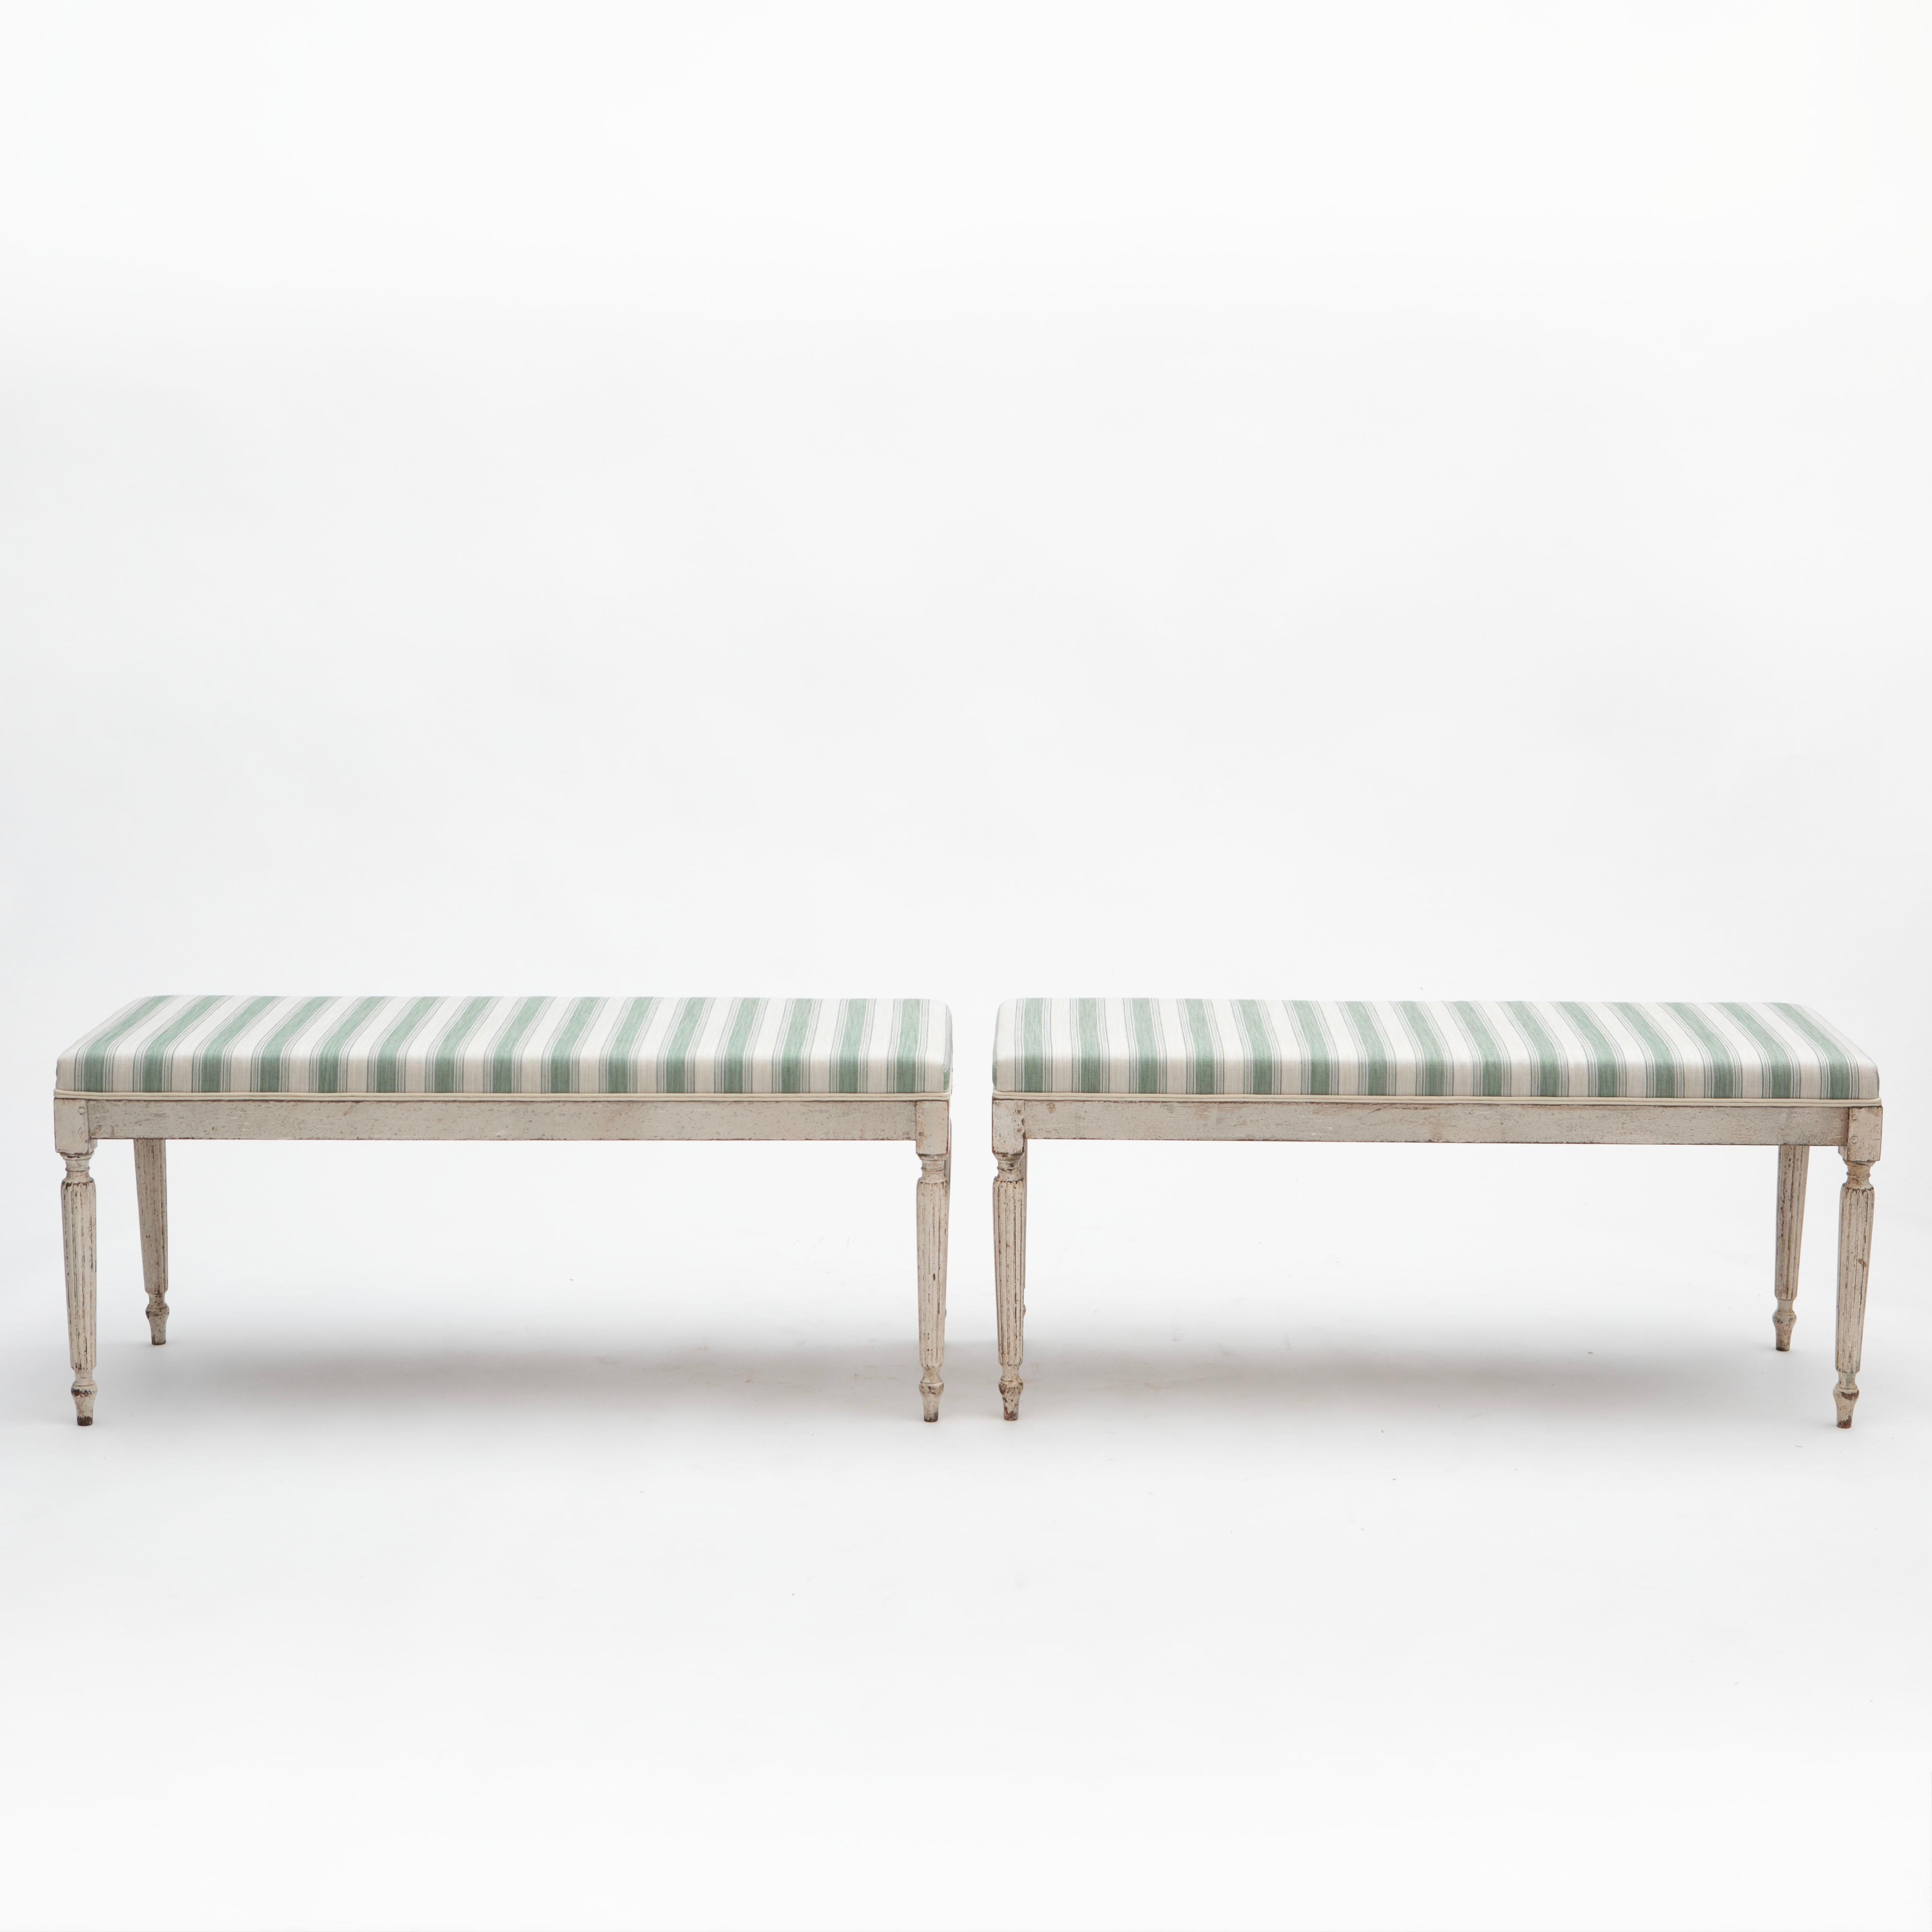 20th Century Pair of Louis XVI Style Benches White Painted With Fabric For Sale